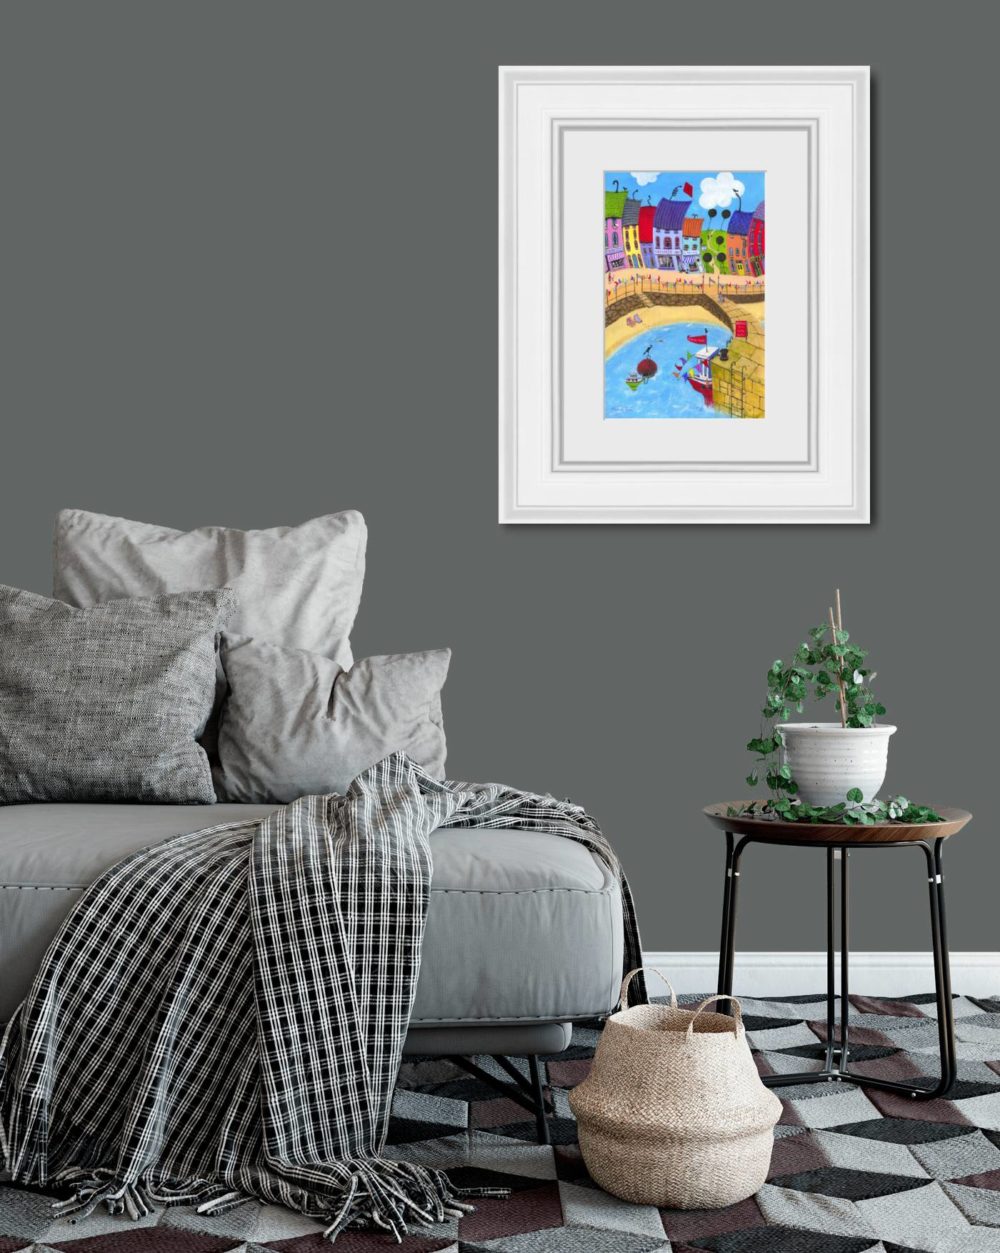 A Day At The Coast In White Frame In Room